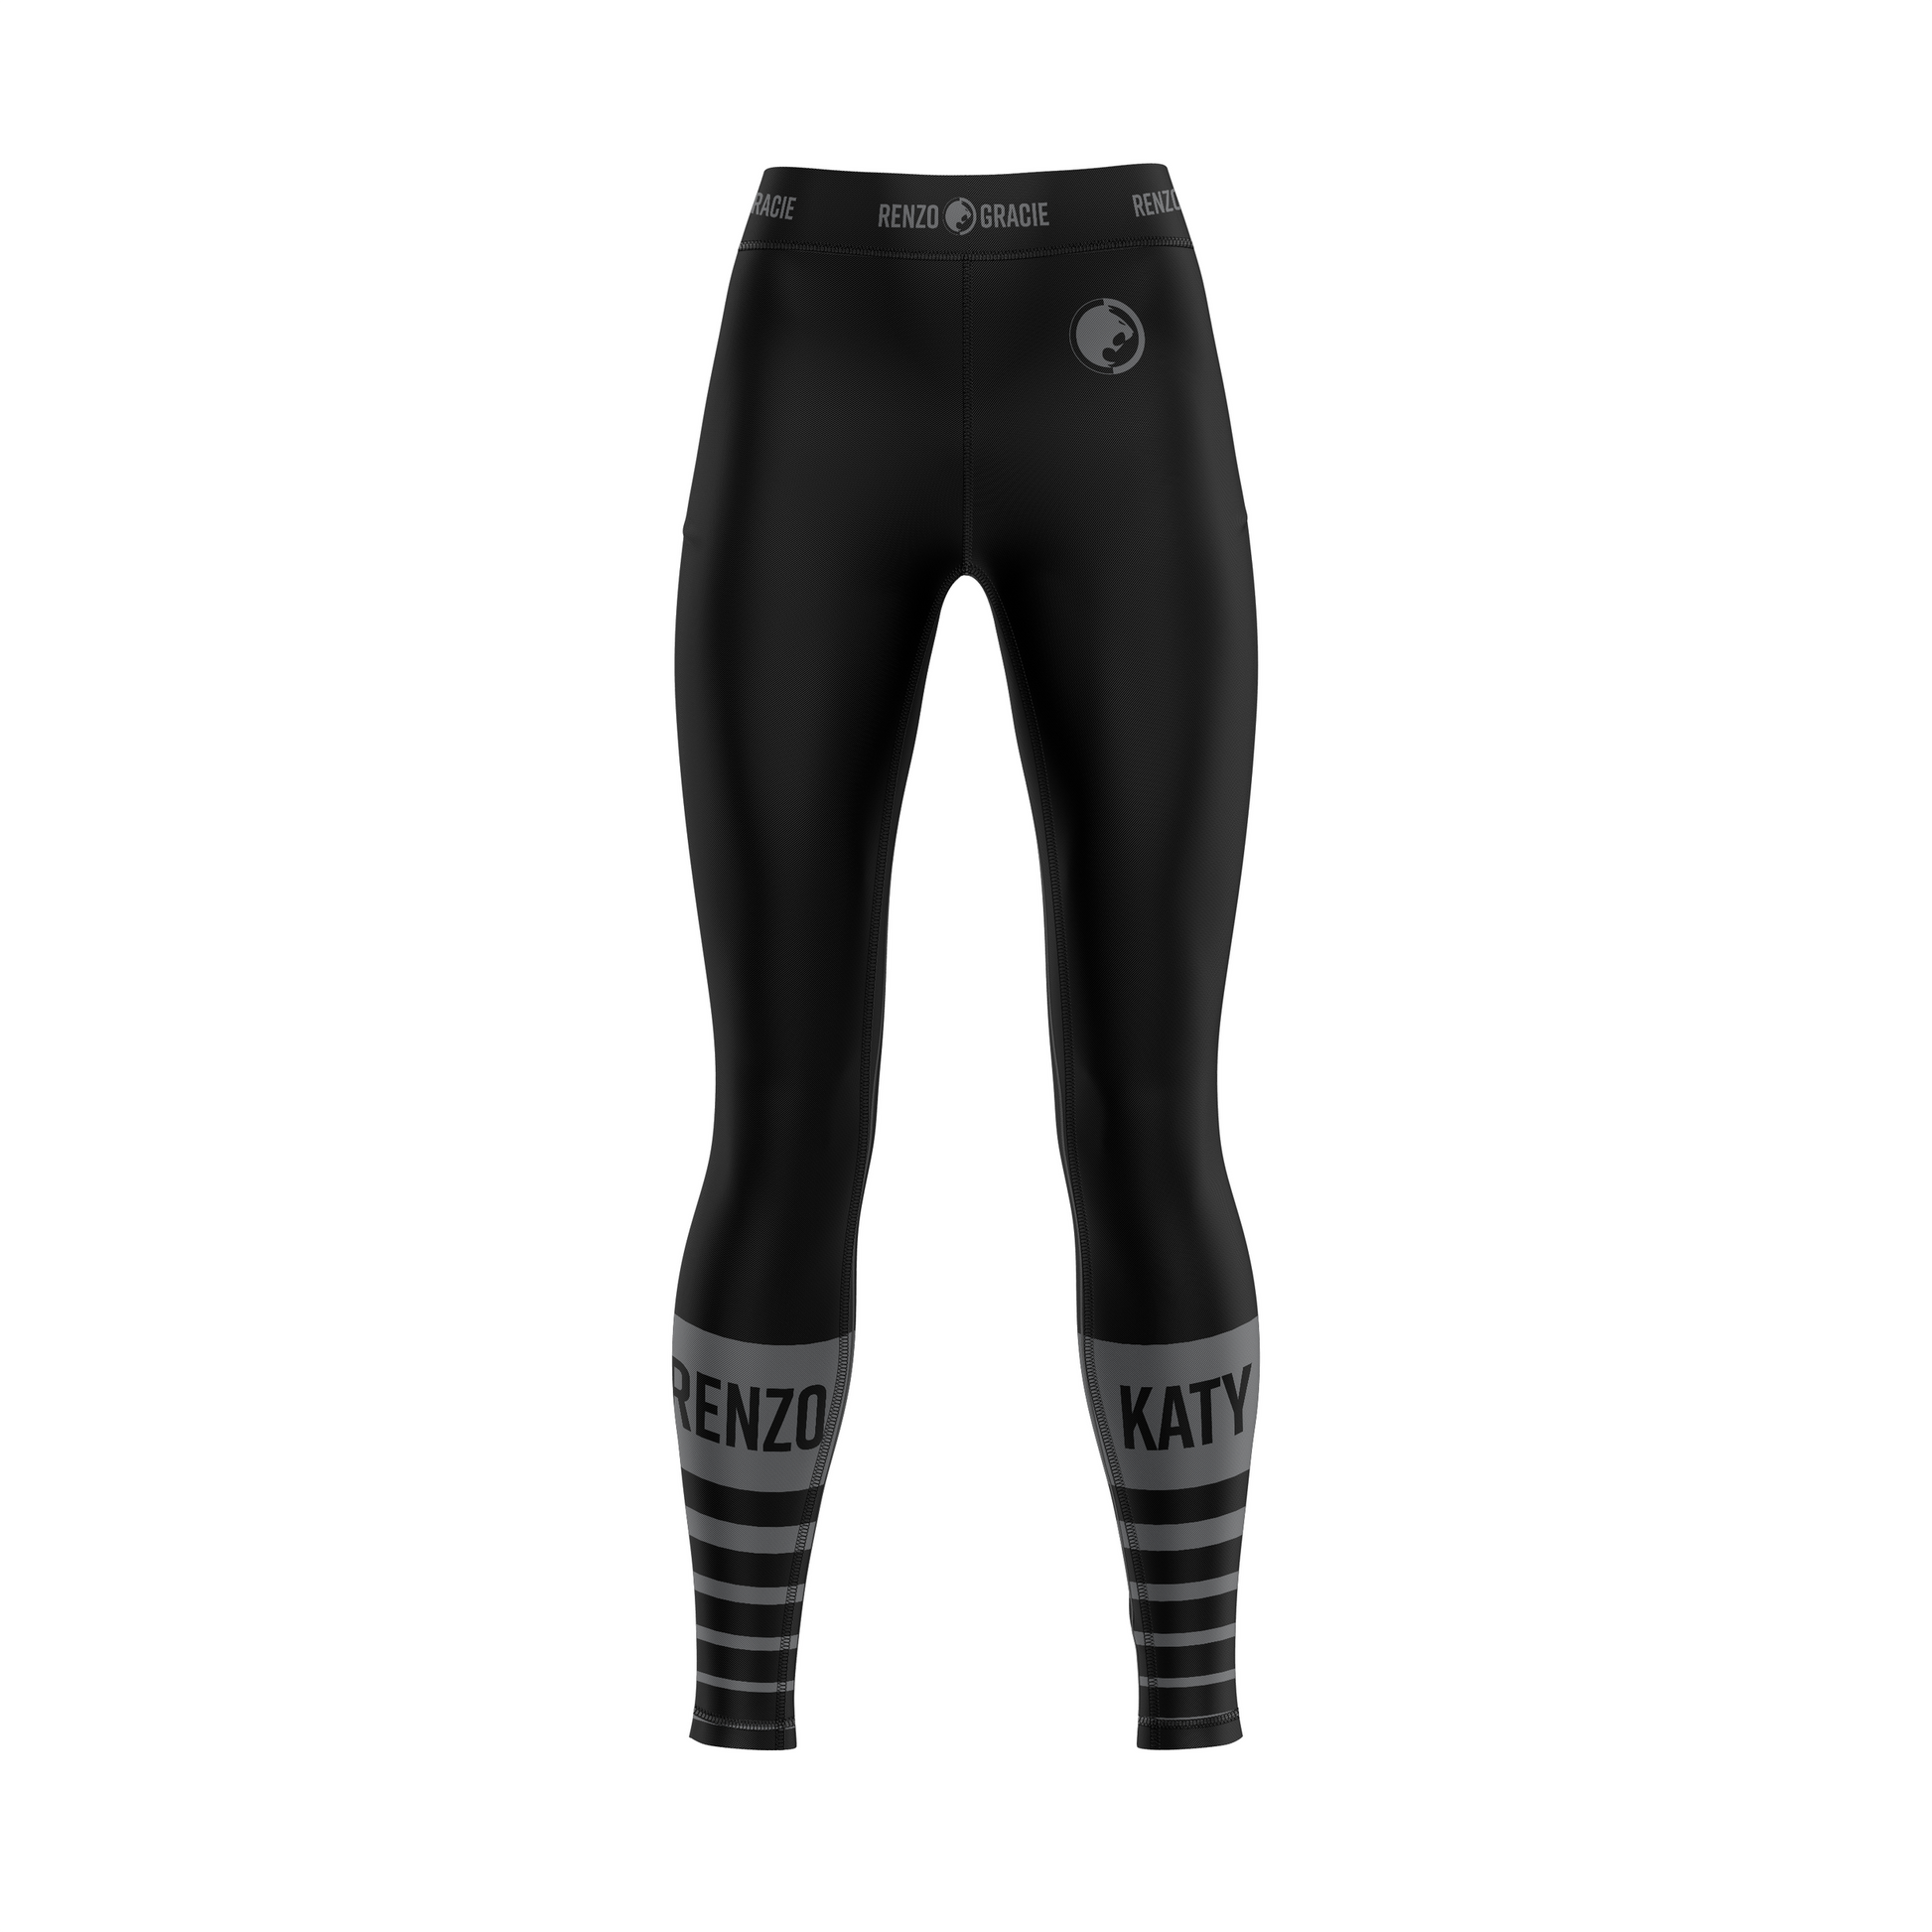 Renzo Gracie Katy women's grappling tights Standard Issue, black and grey